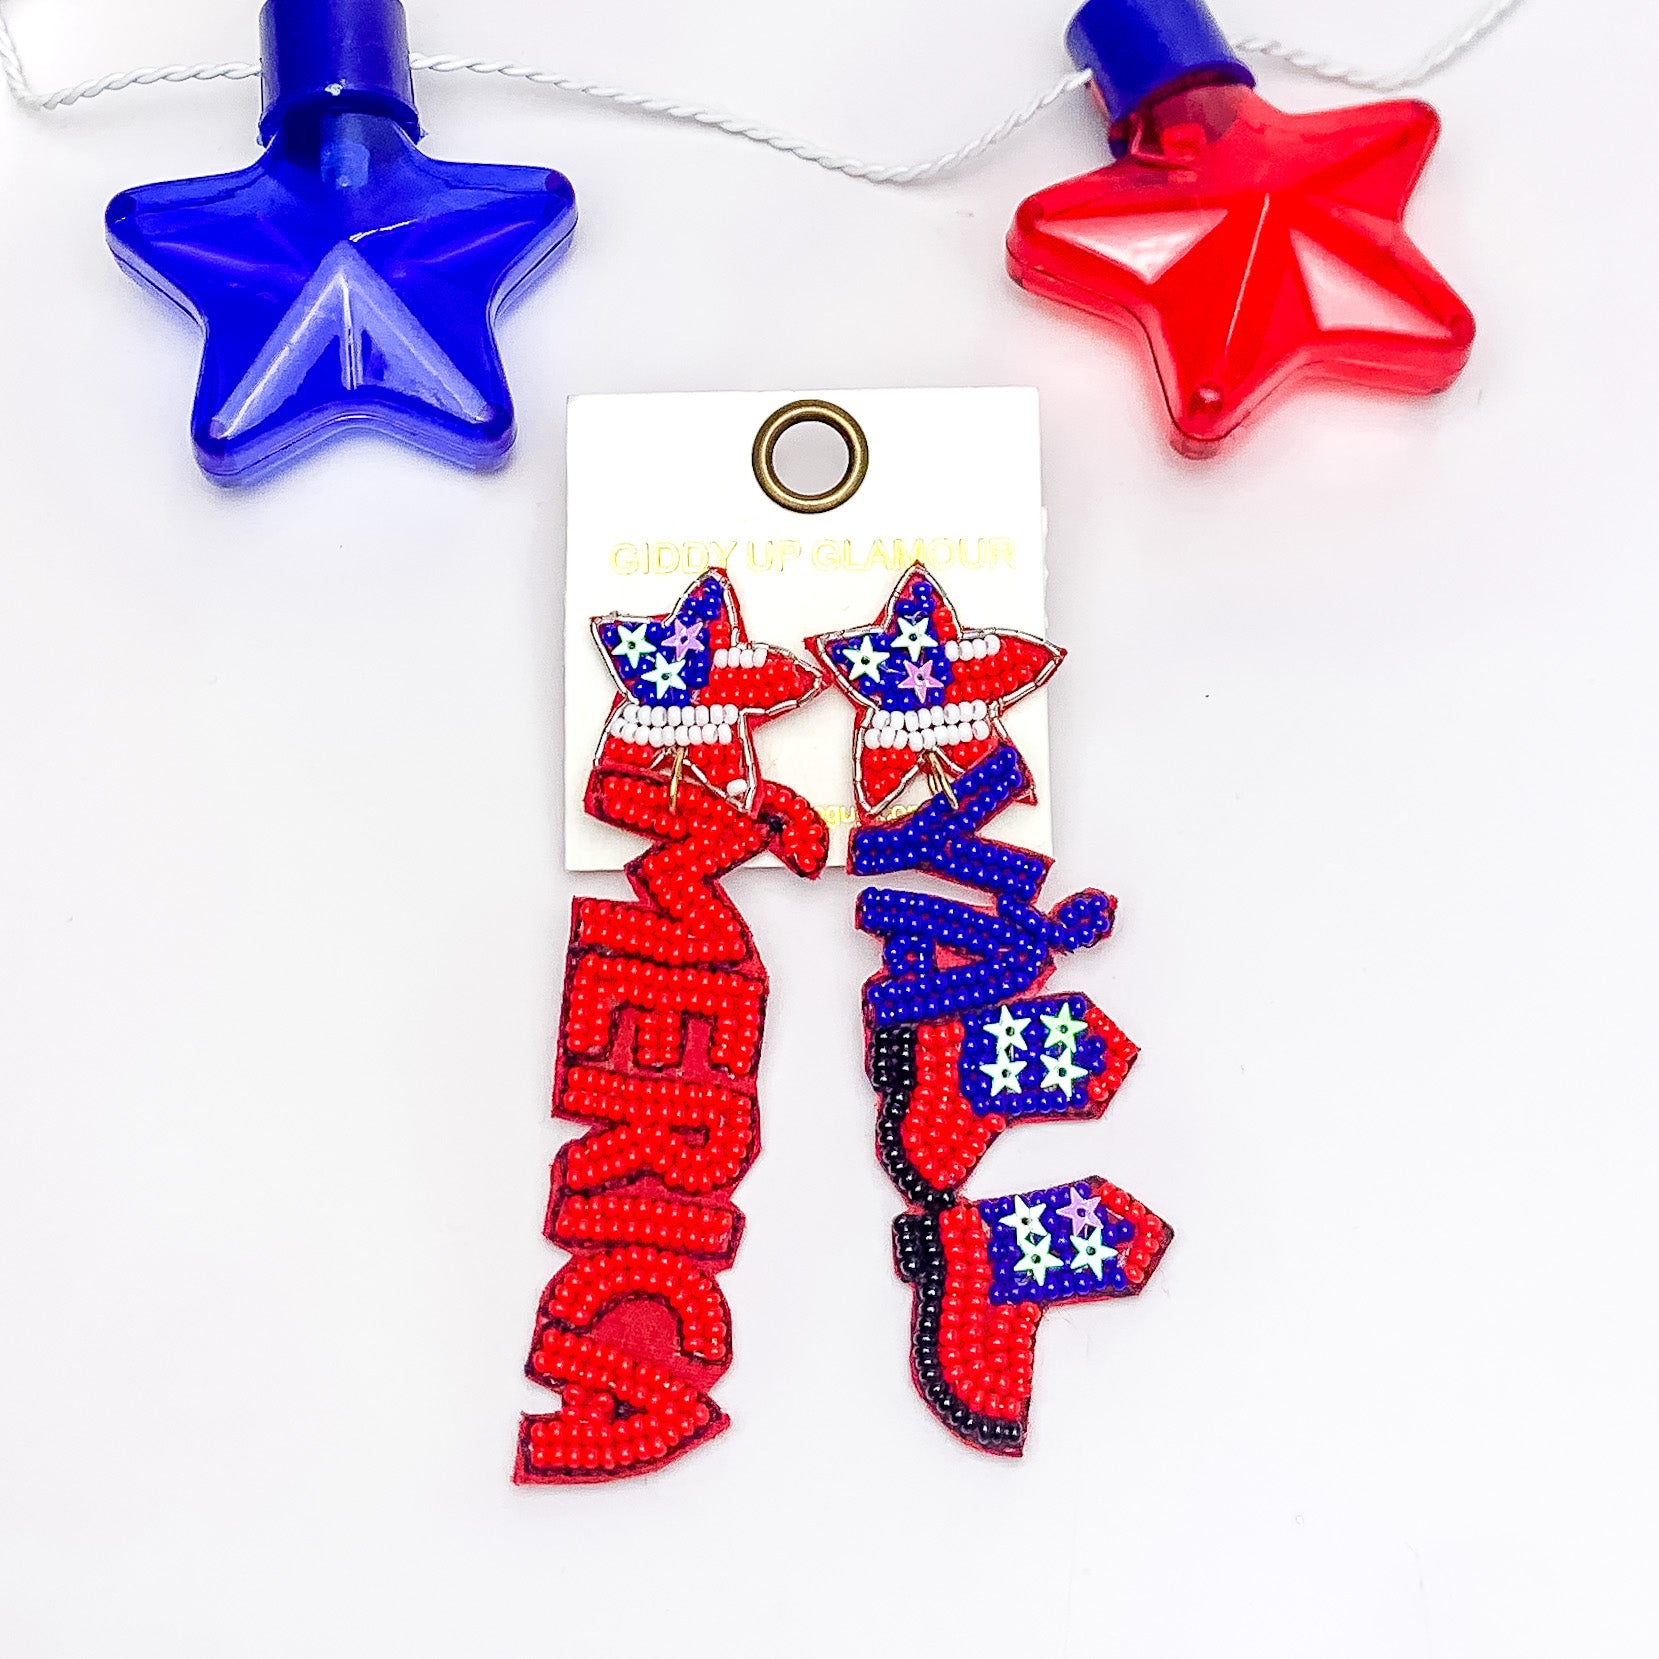 Star shaped post earrings with white and red stripes and a blue part with star sequins. One earrings has a red pendant that spells ot "'MERICA" and the other one has a pendant that spells out "Y'ALL." The y and a include blue beads while the two Ls are in the shape of boots. These earrings are pictured on a white background. 